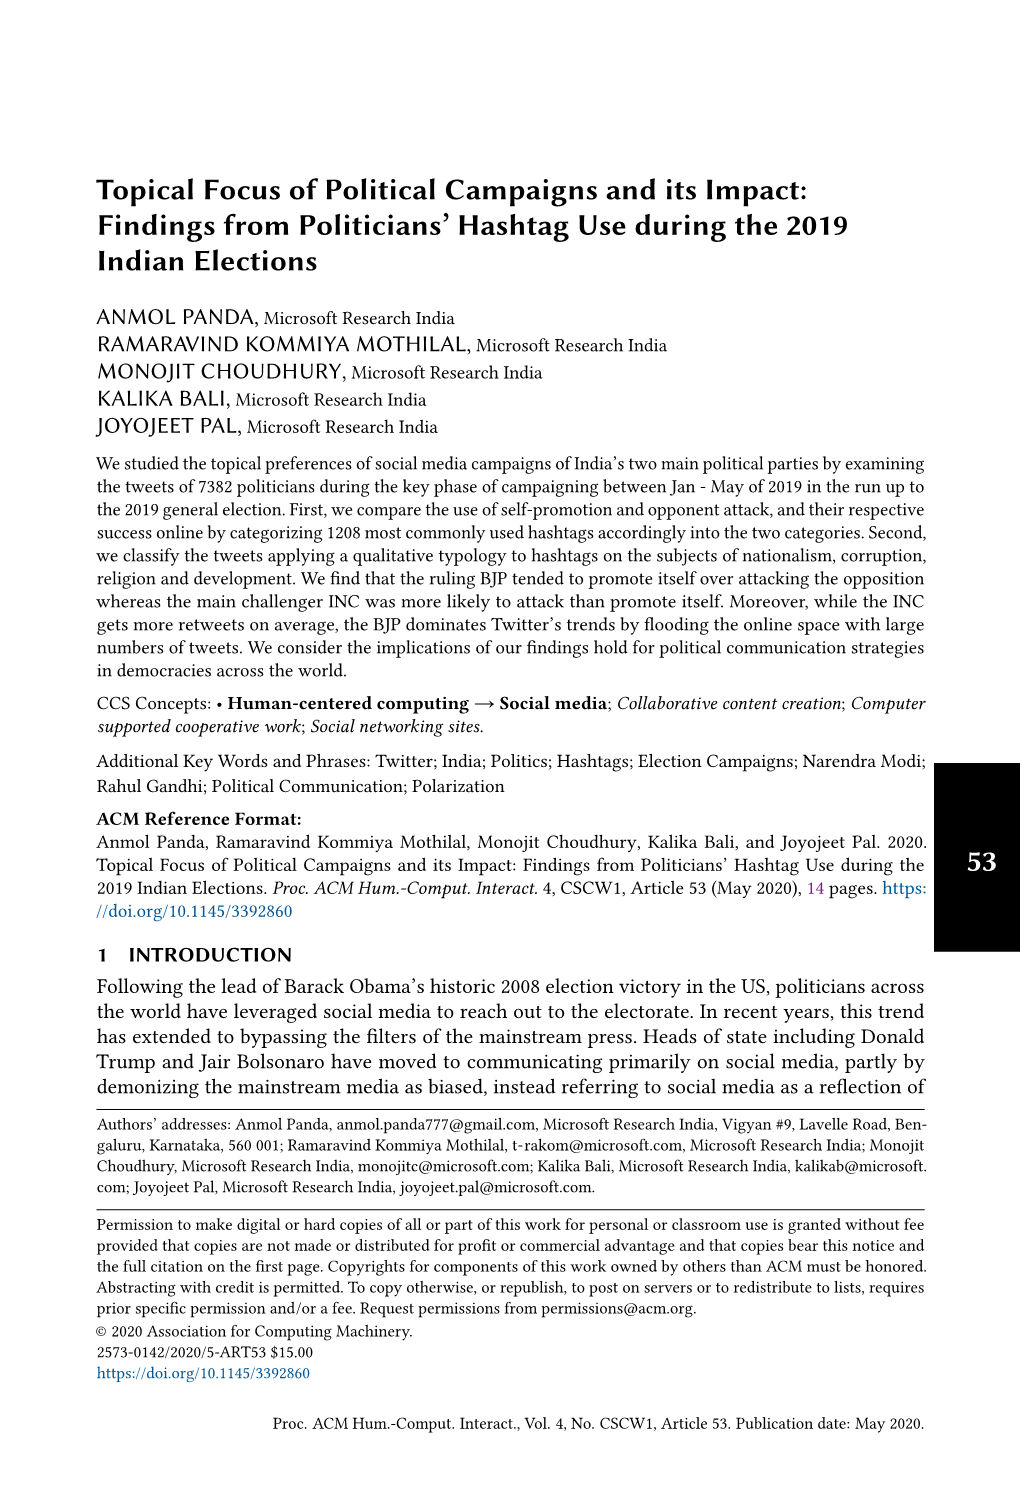 Topical Focus of Political Campaigns and Its Impact: Findings from Politicians’ Hashtag Use During the 2019 Indian Elections